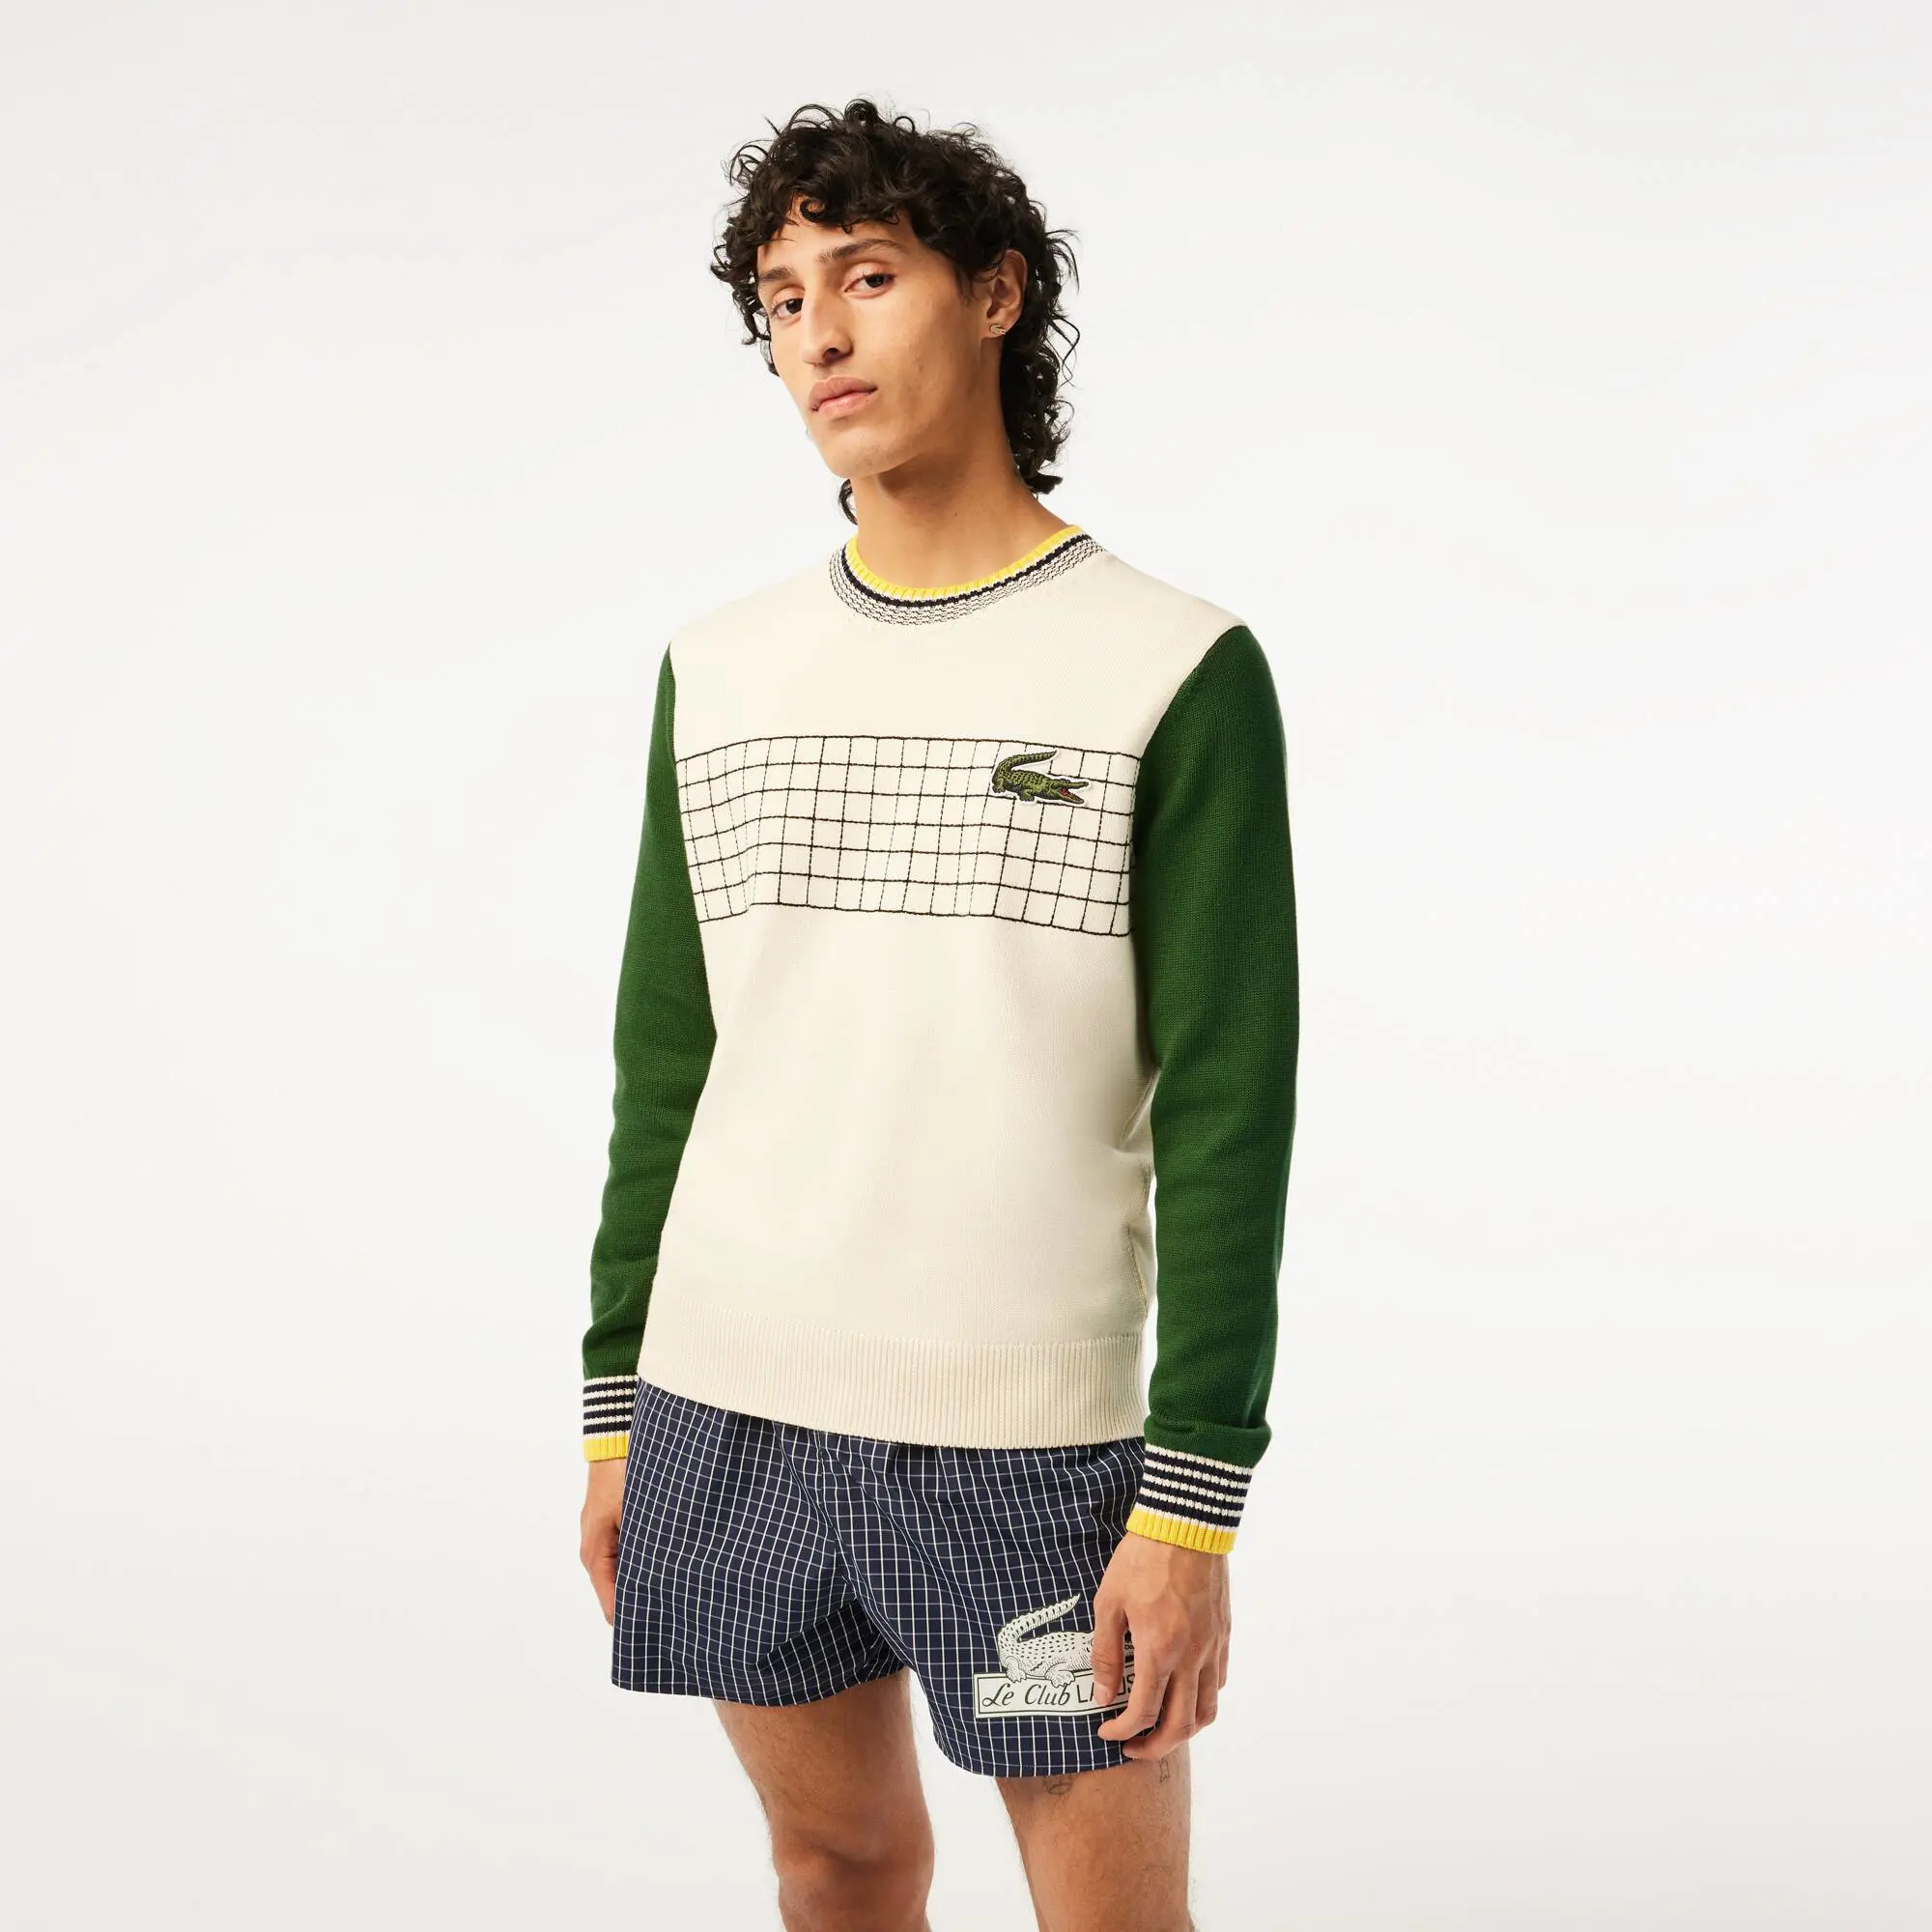 Lacoste Men’s Relaxed Fit Organic Cotton Sweater. 1